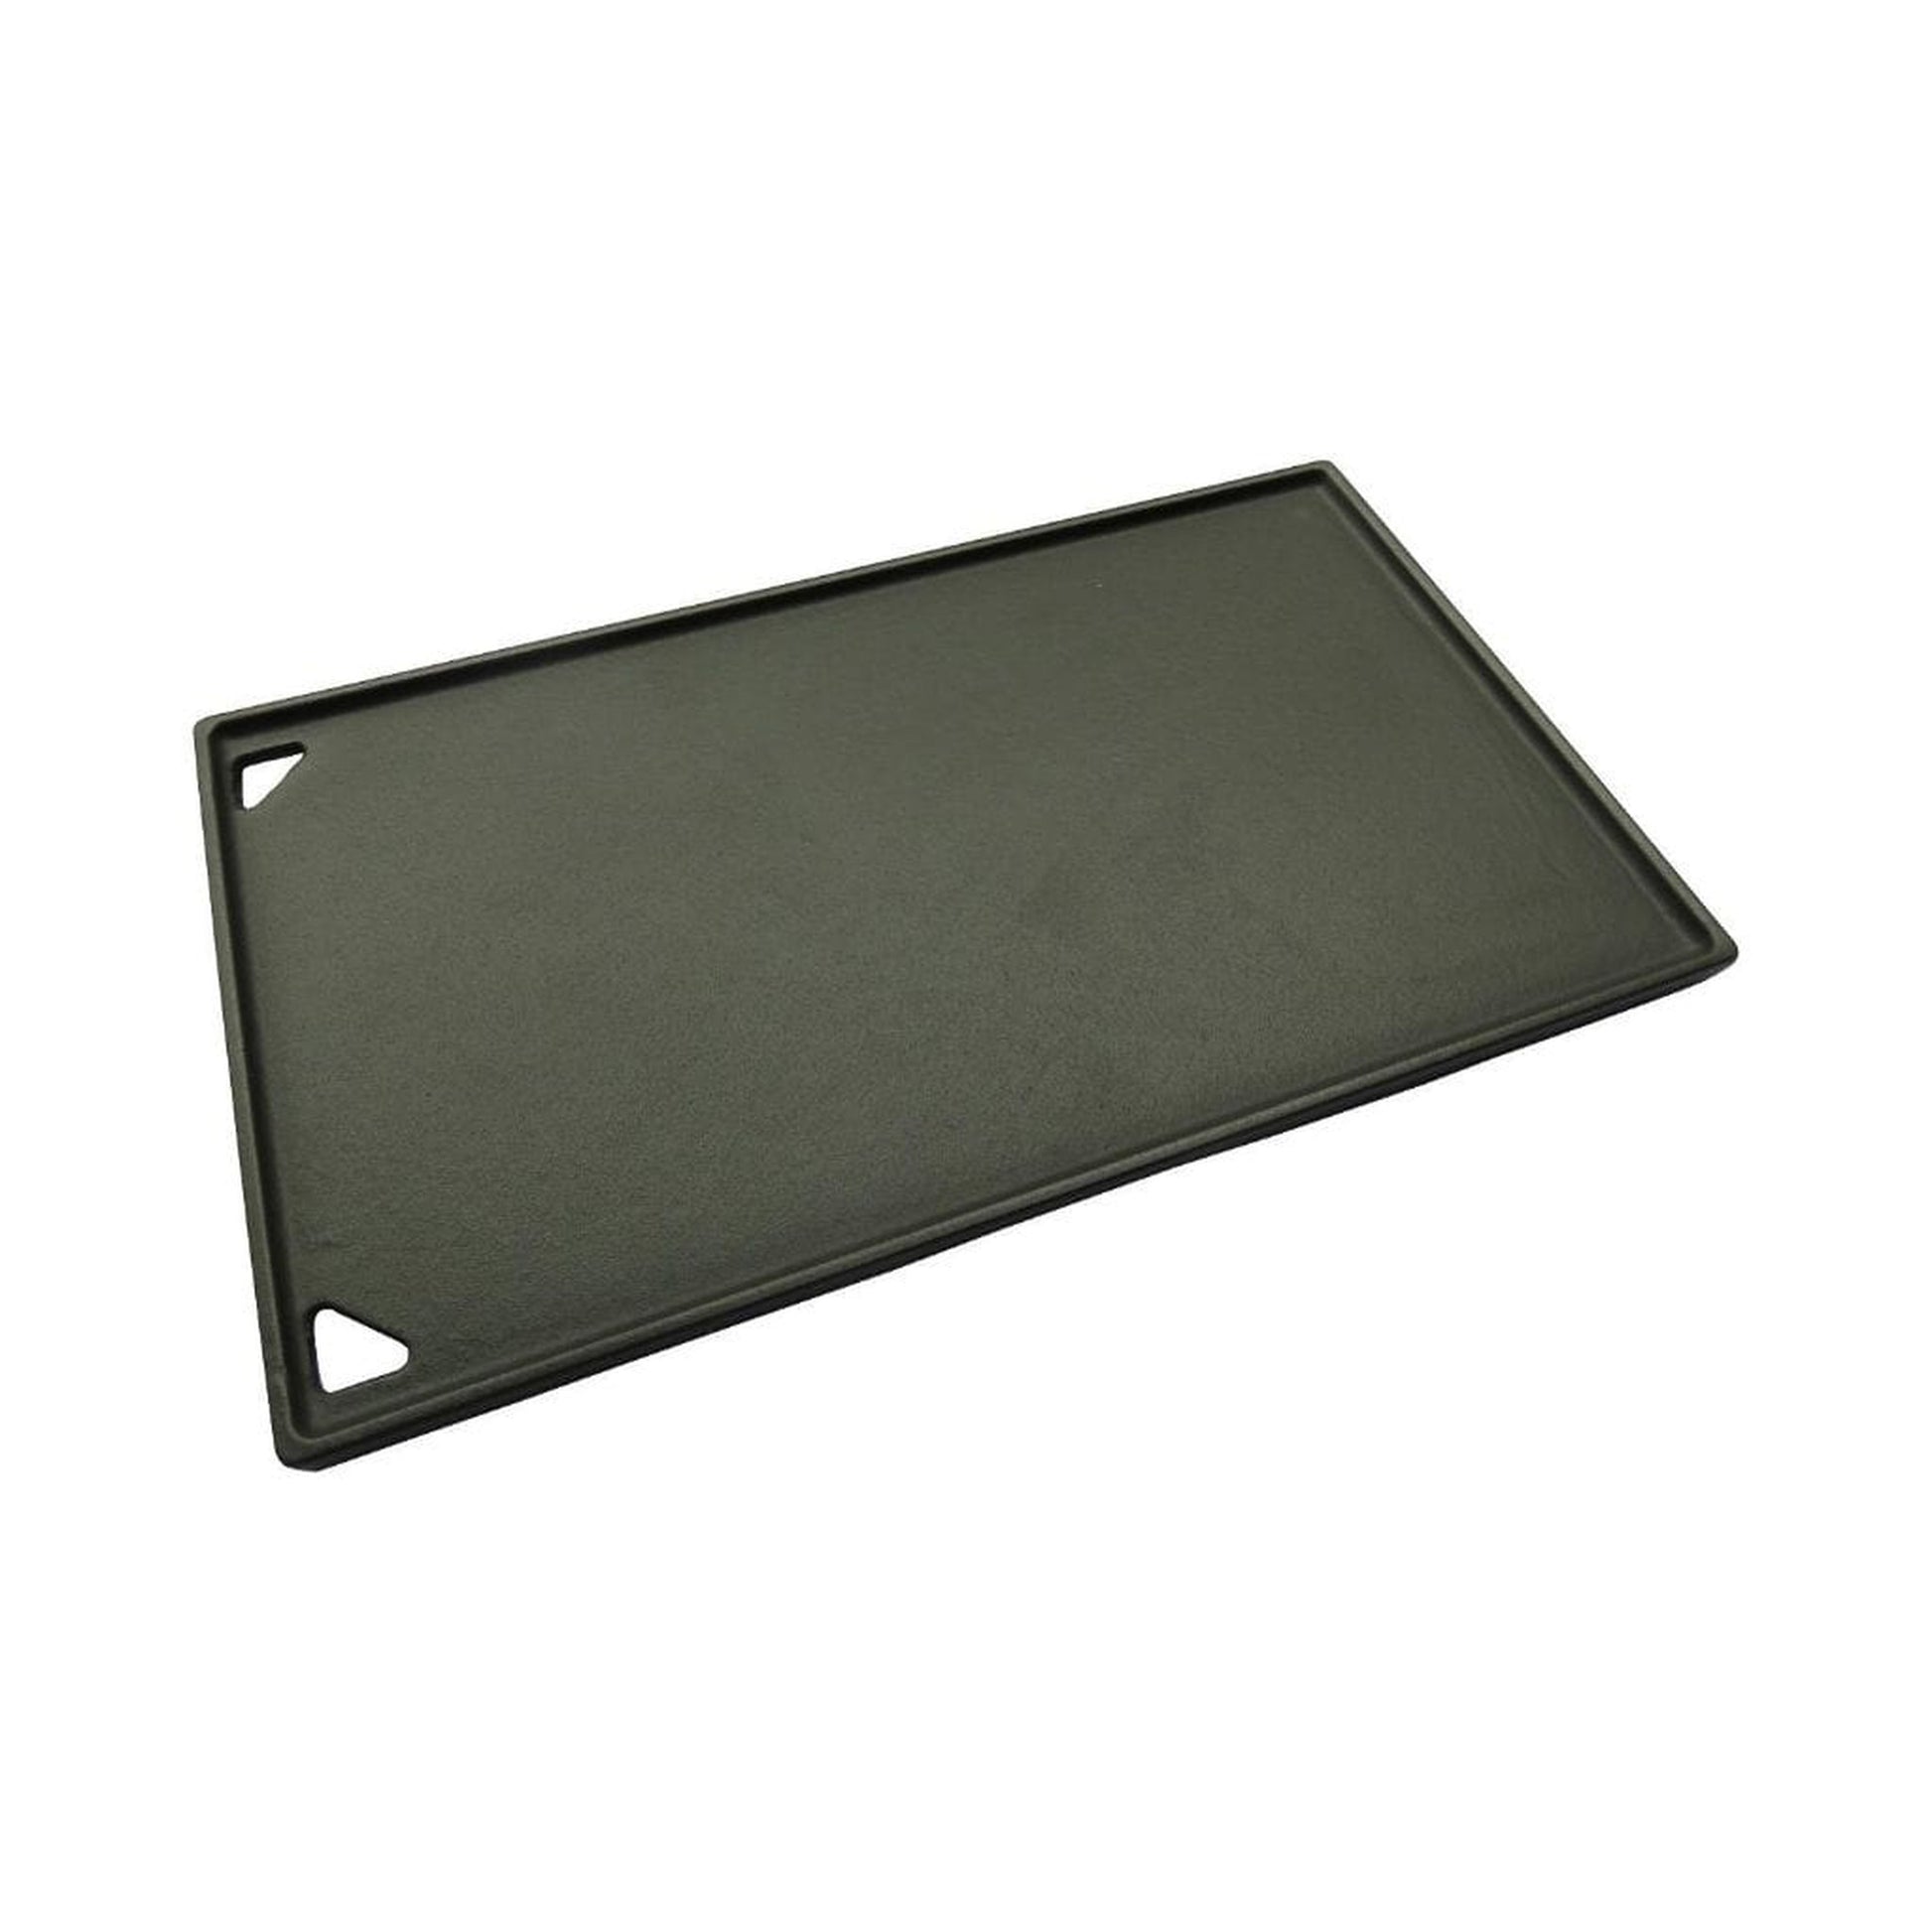 Everdure Center Flat Plate for 52" FURNACE™ Gas Grill